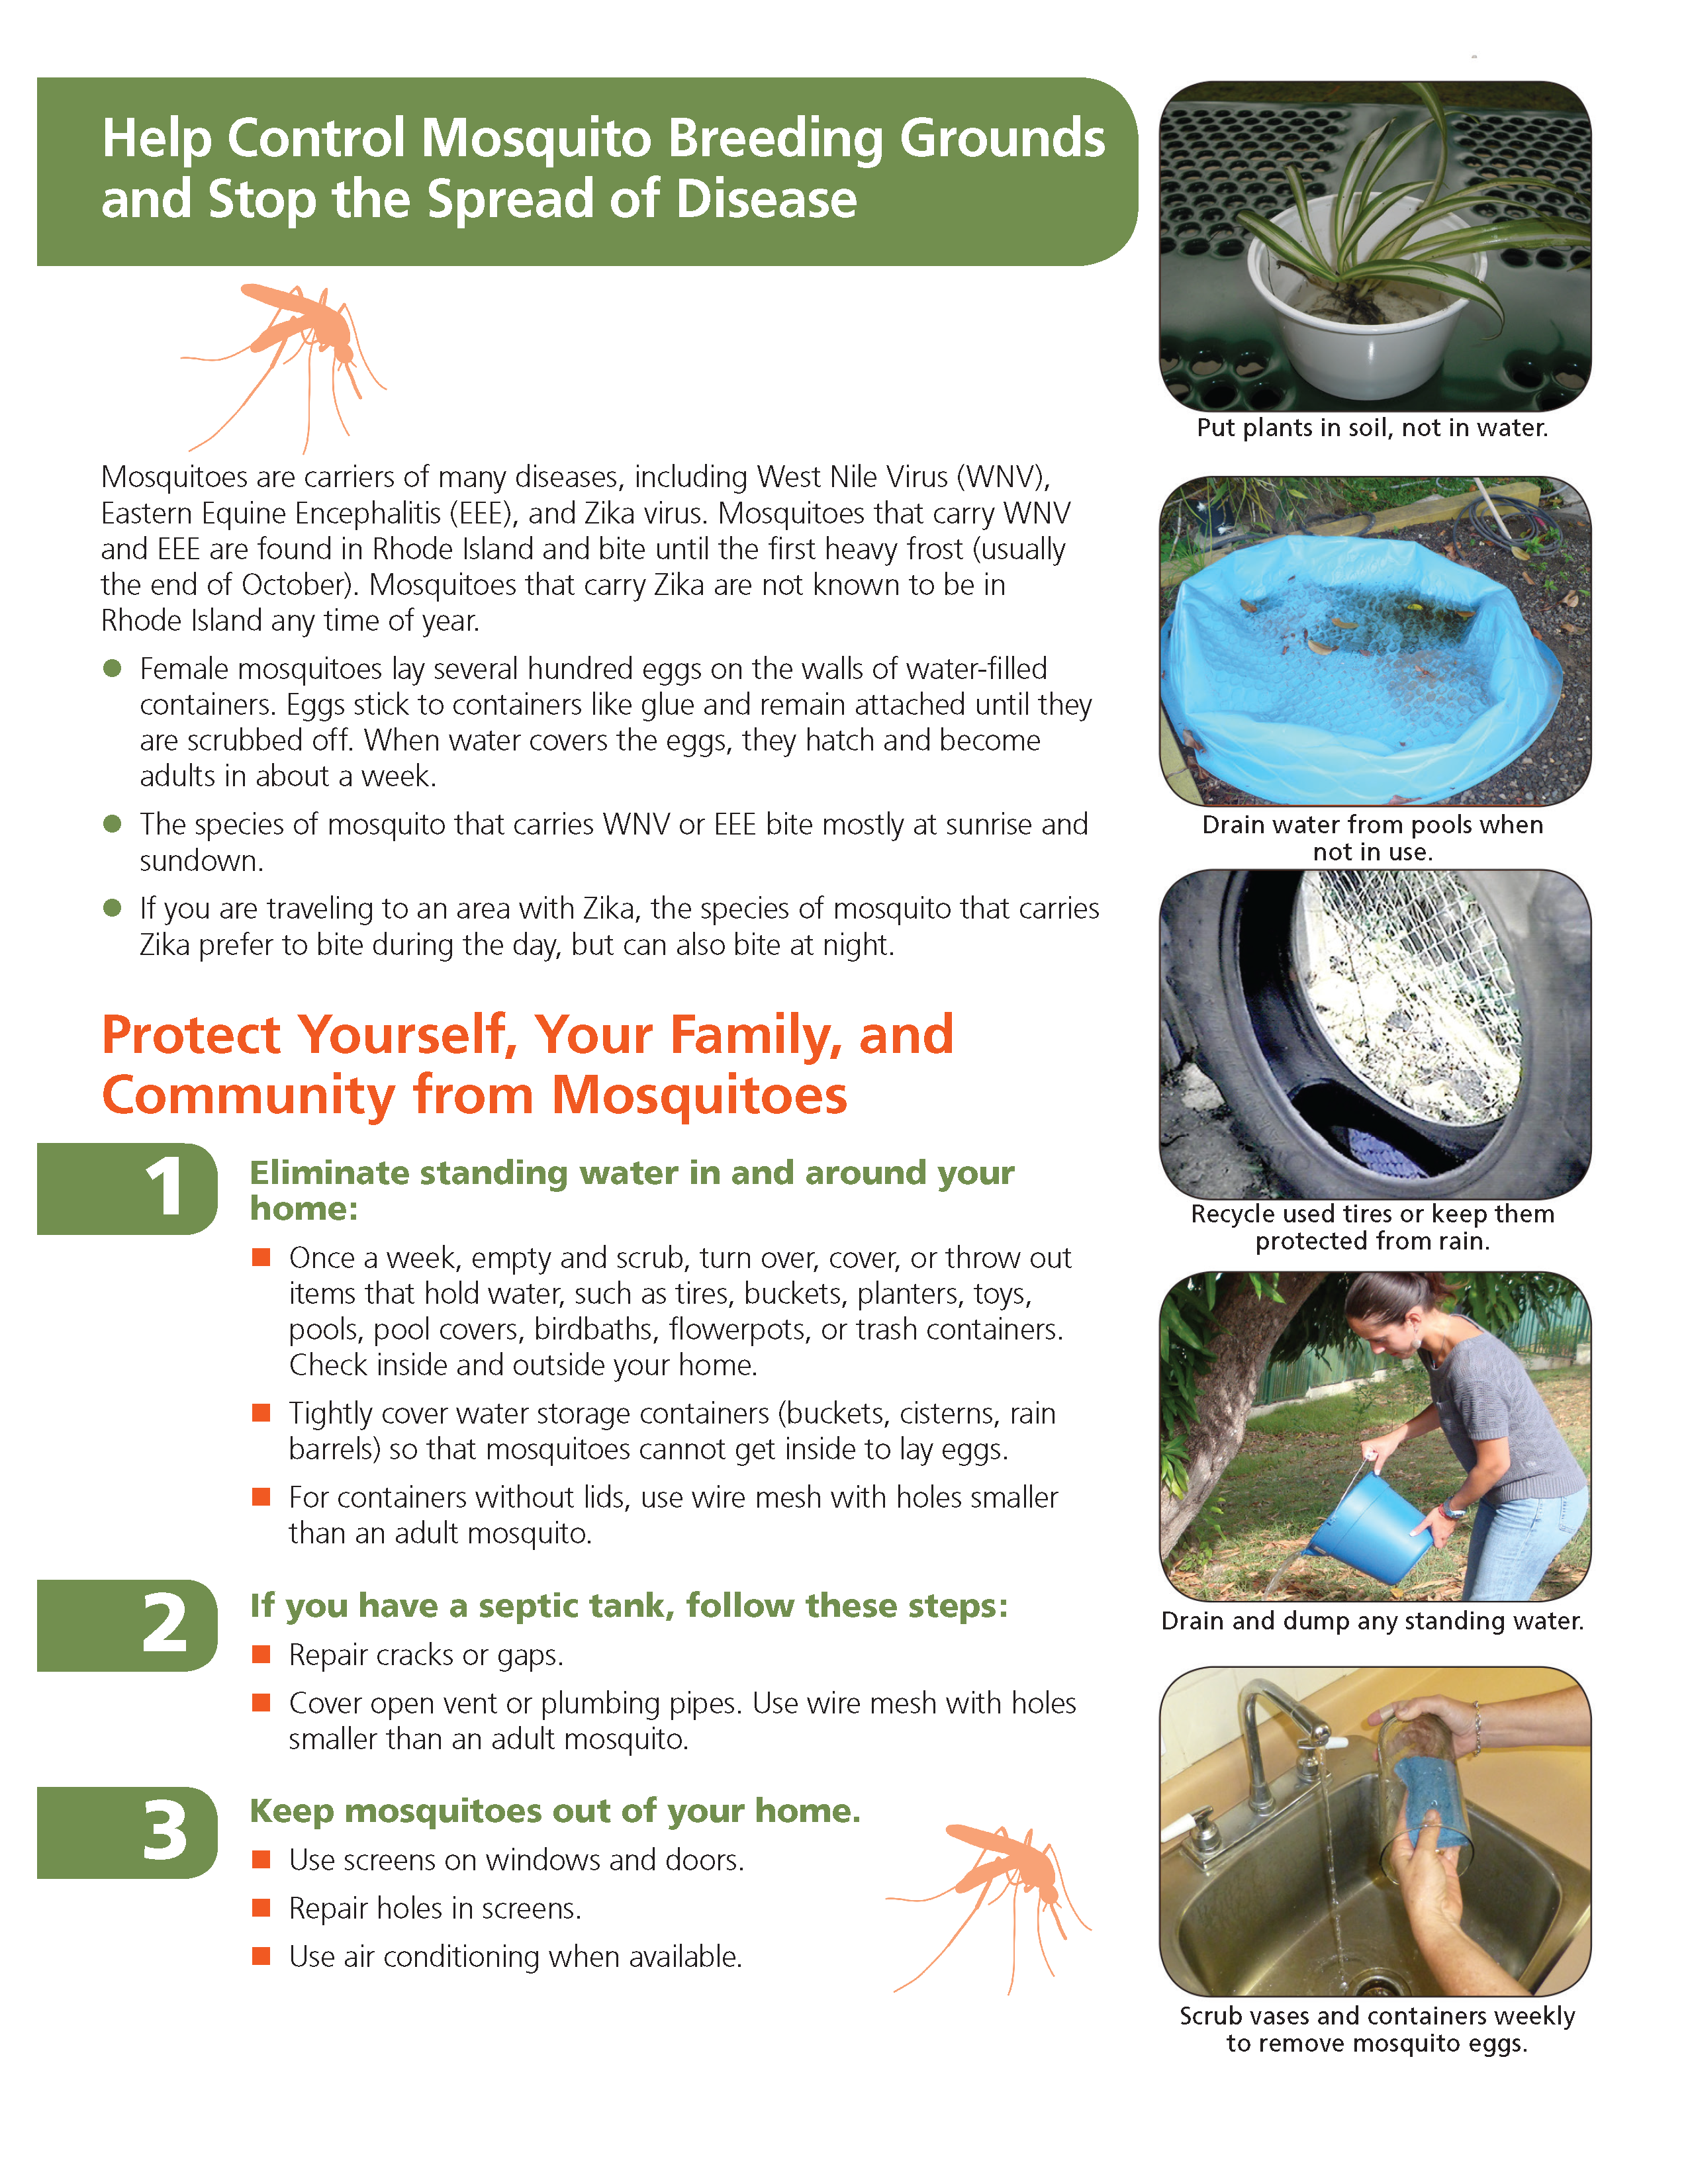 Help Control Mosquito Breeding Grounds and Stop Disease